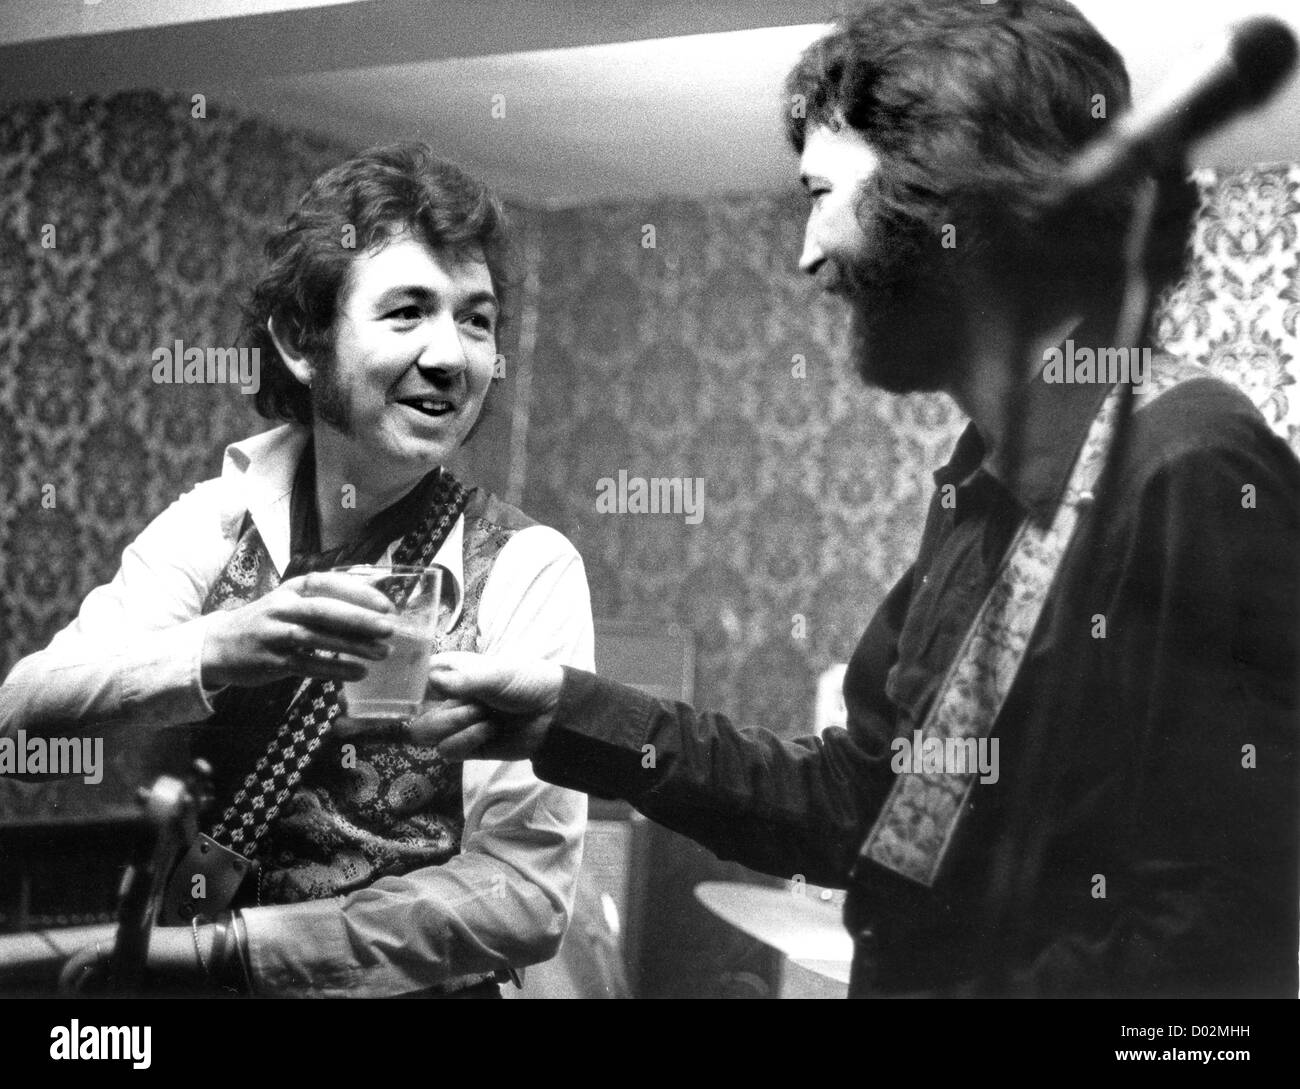 Ronnie Lane performing with Eric Clapton at the Drum and Monkey pub in Minsterley Shropshire in the 1977 PICTURE BY DAVID BAGNALL Stock Photo